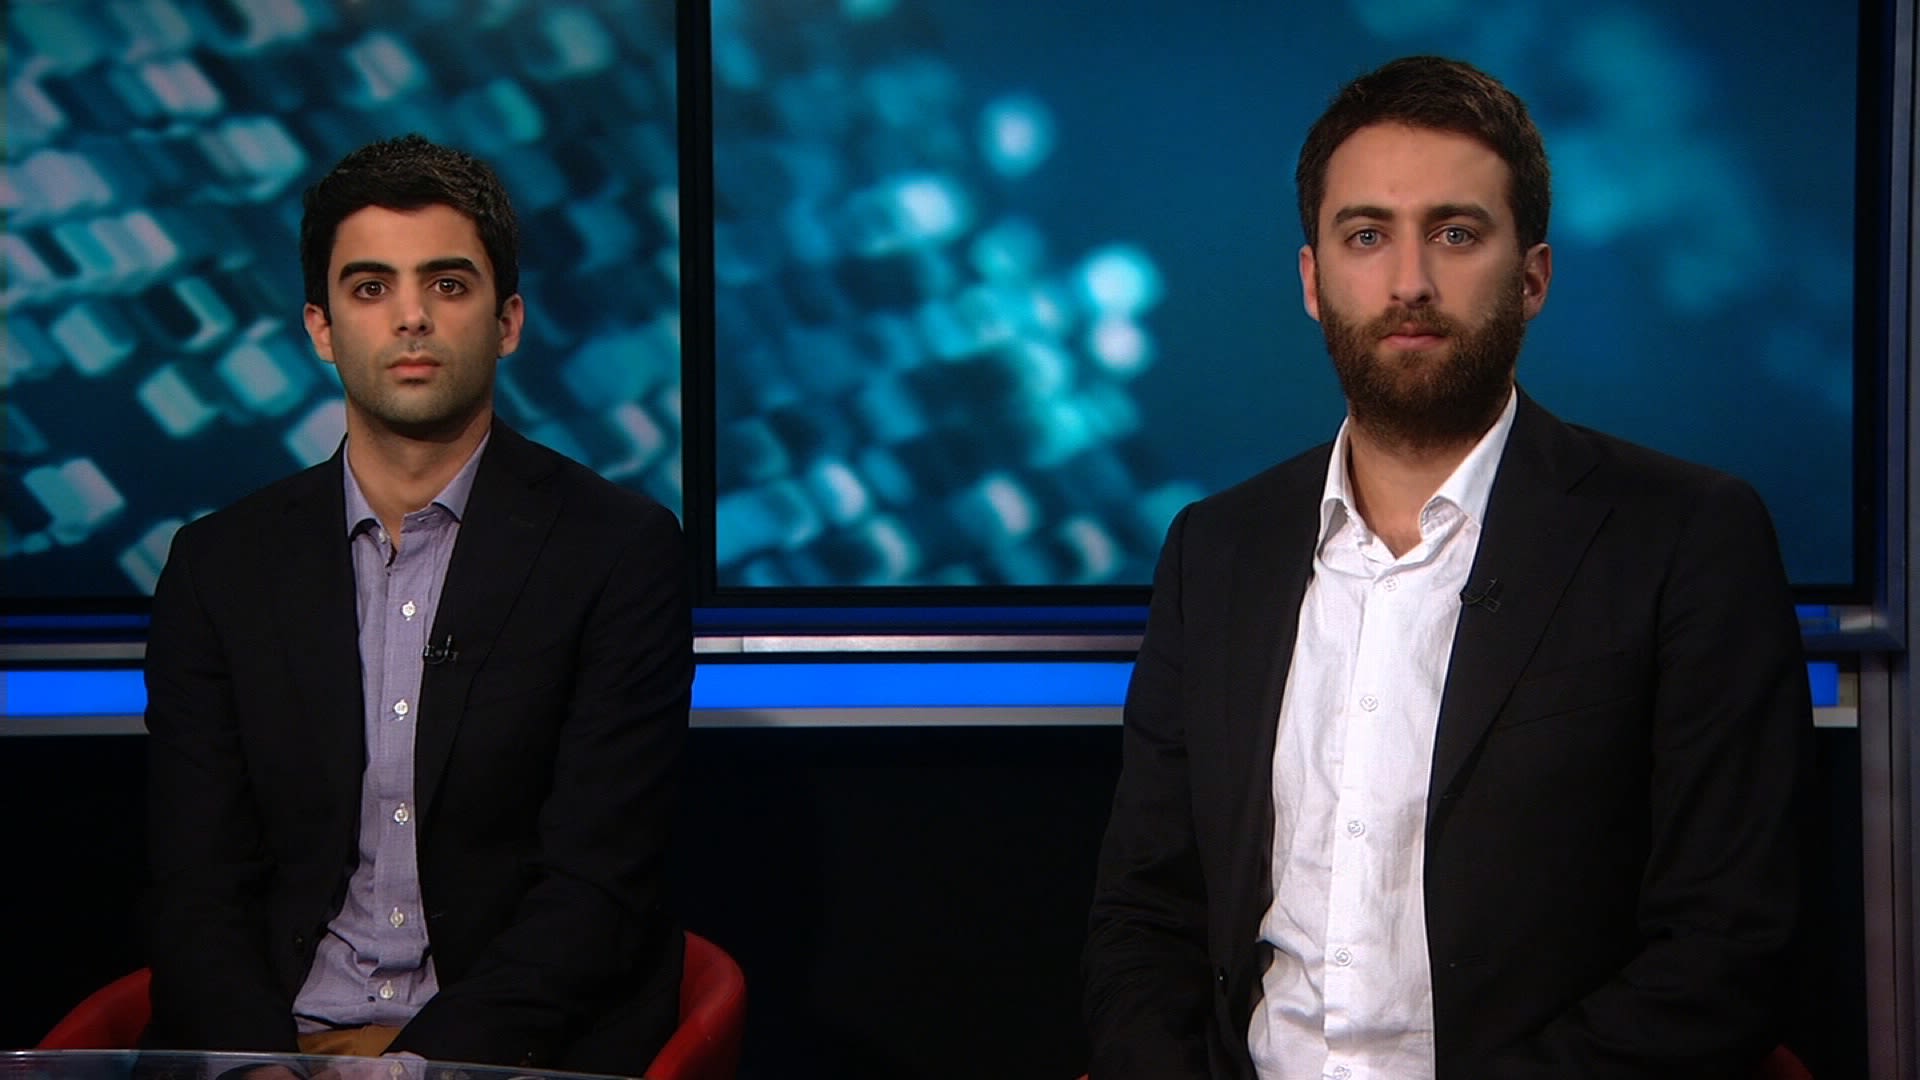 WATCH: Caruana Galizia Brothers On CNN's Amanpour: 'Daphne Project Has  Finally Humanised Our Mother